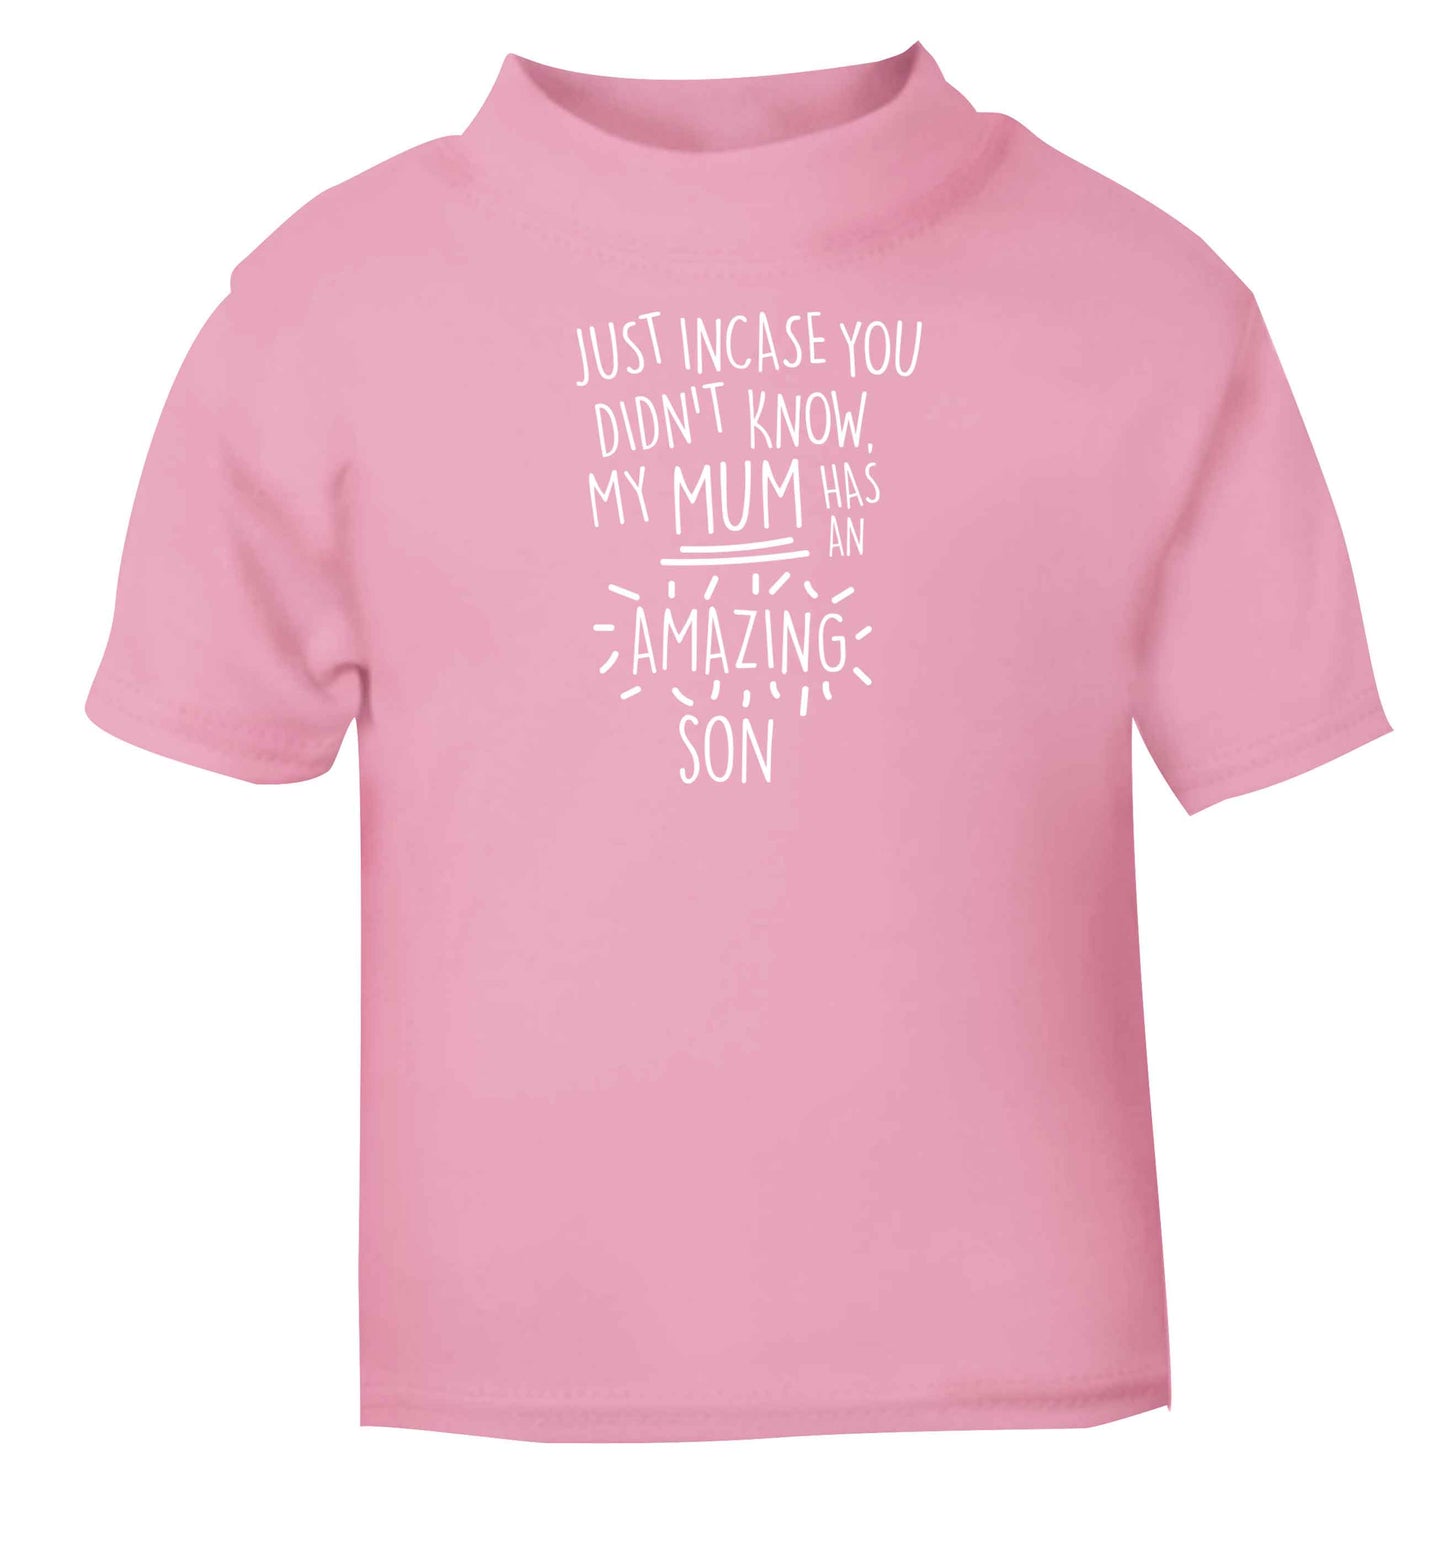 Just incase you didn't know my mum has an amazing son Children's light pink Tshirt 12-13 Years